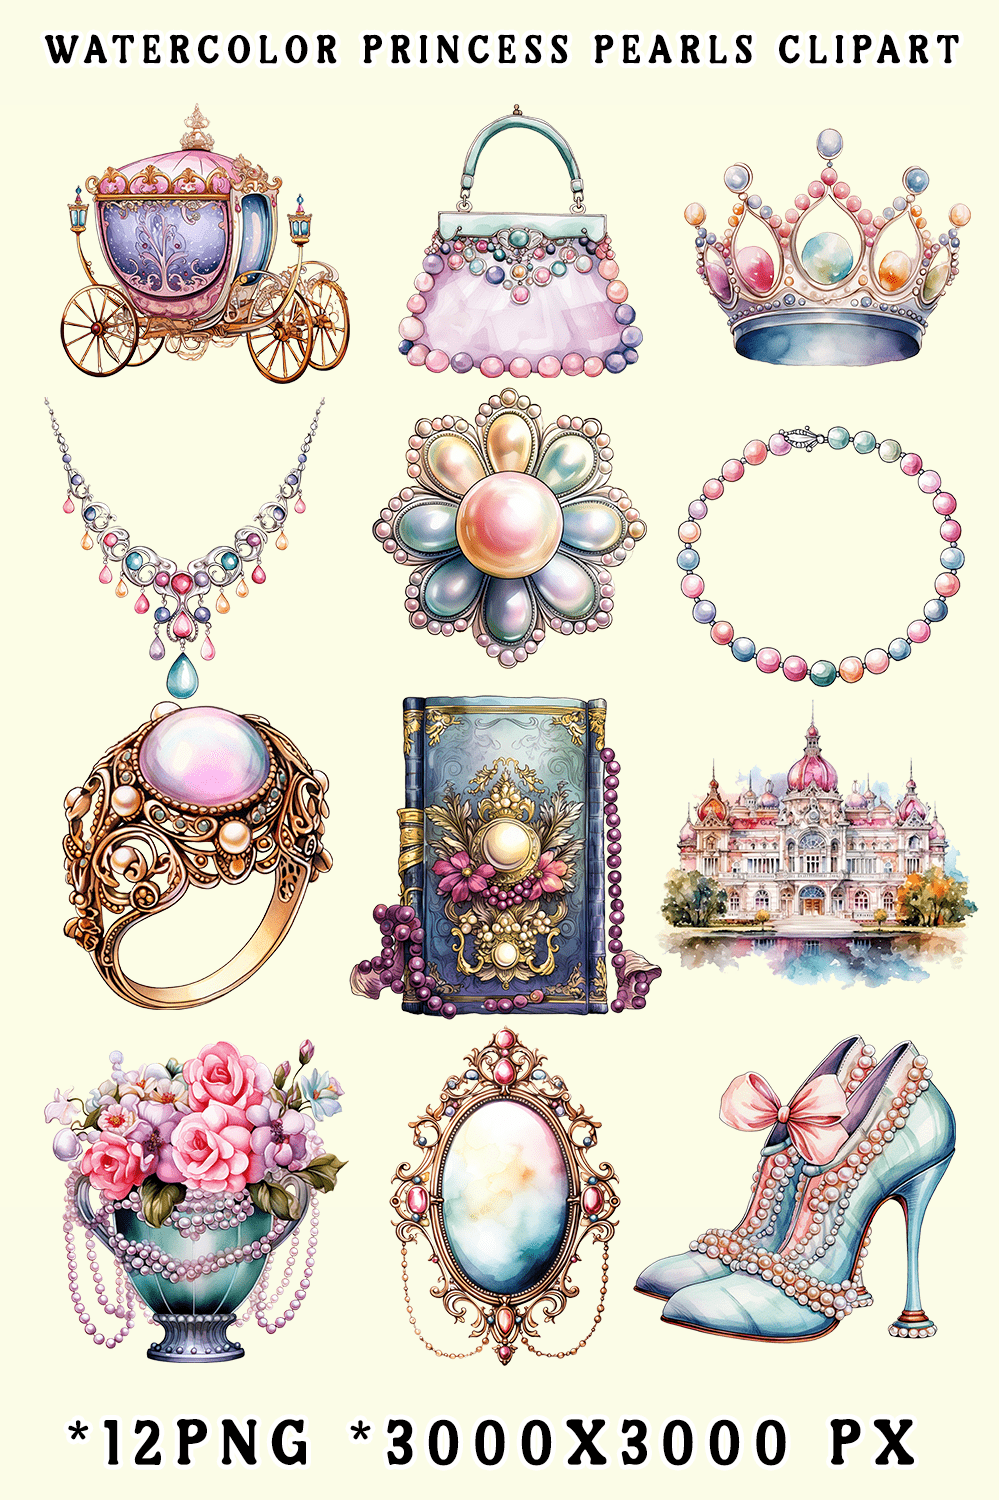 Watercolor Princess Pearls Clipart pinterest preview image.